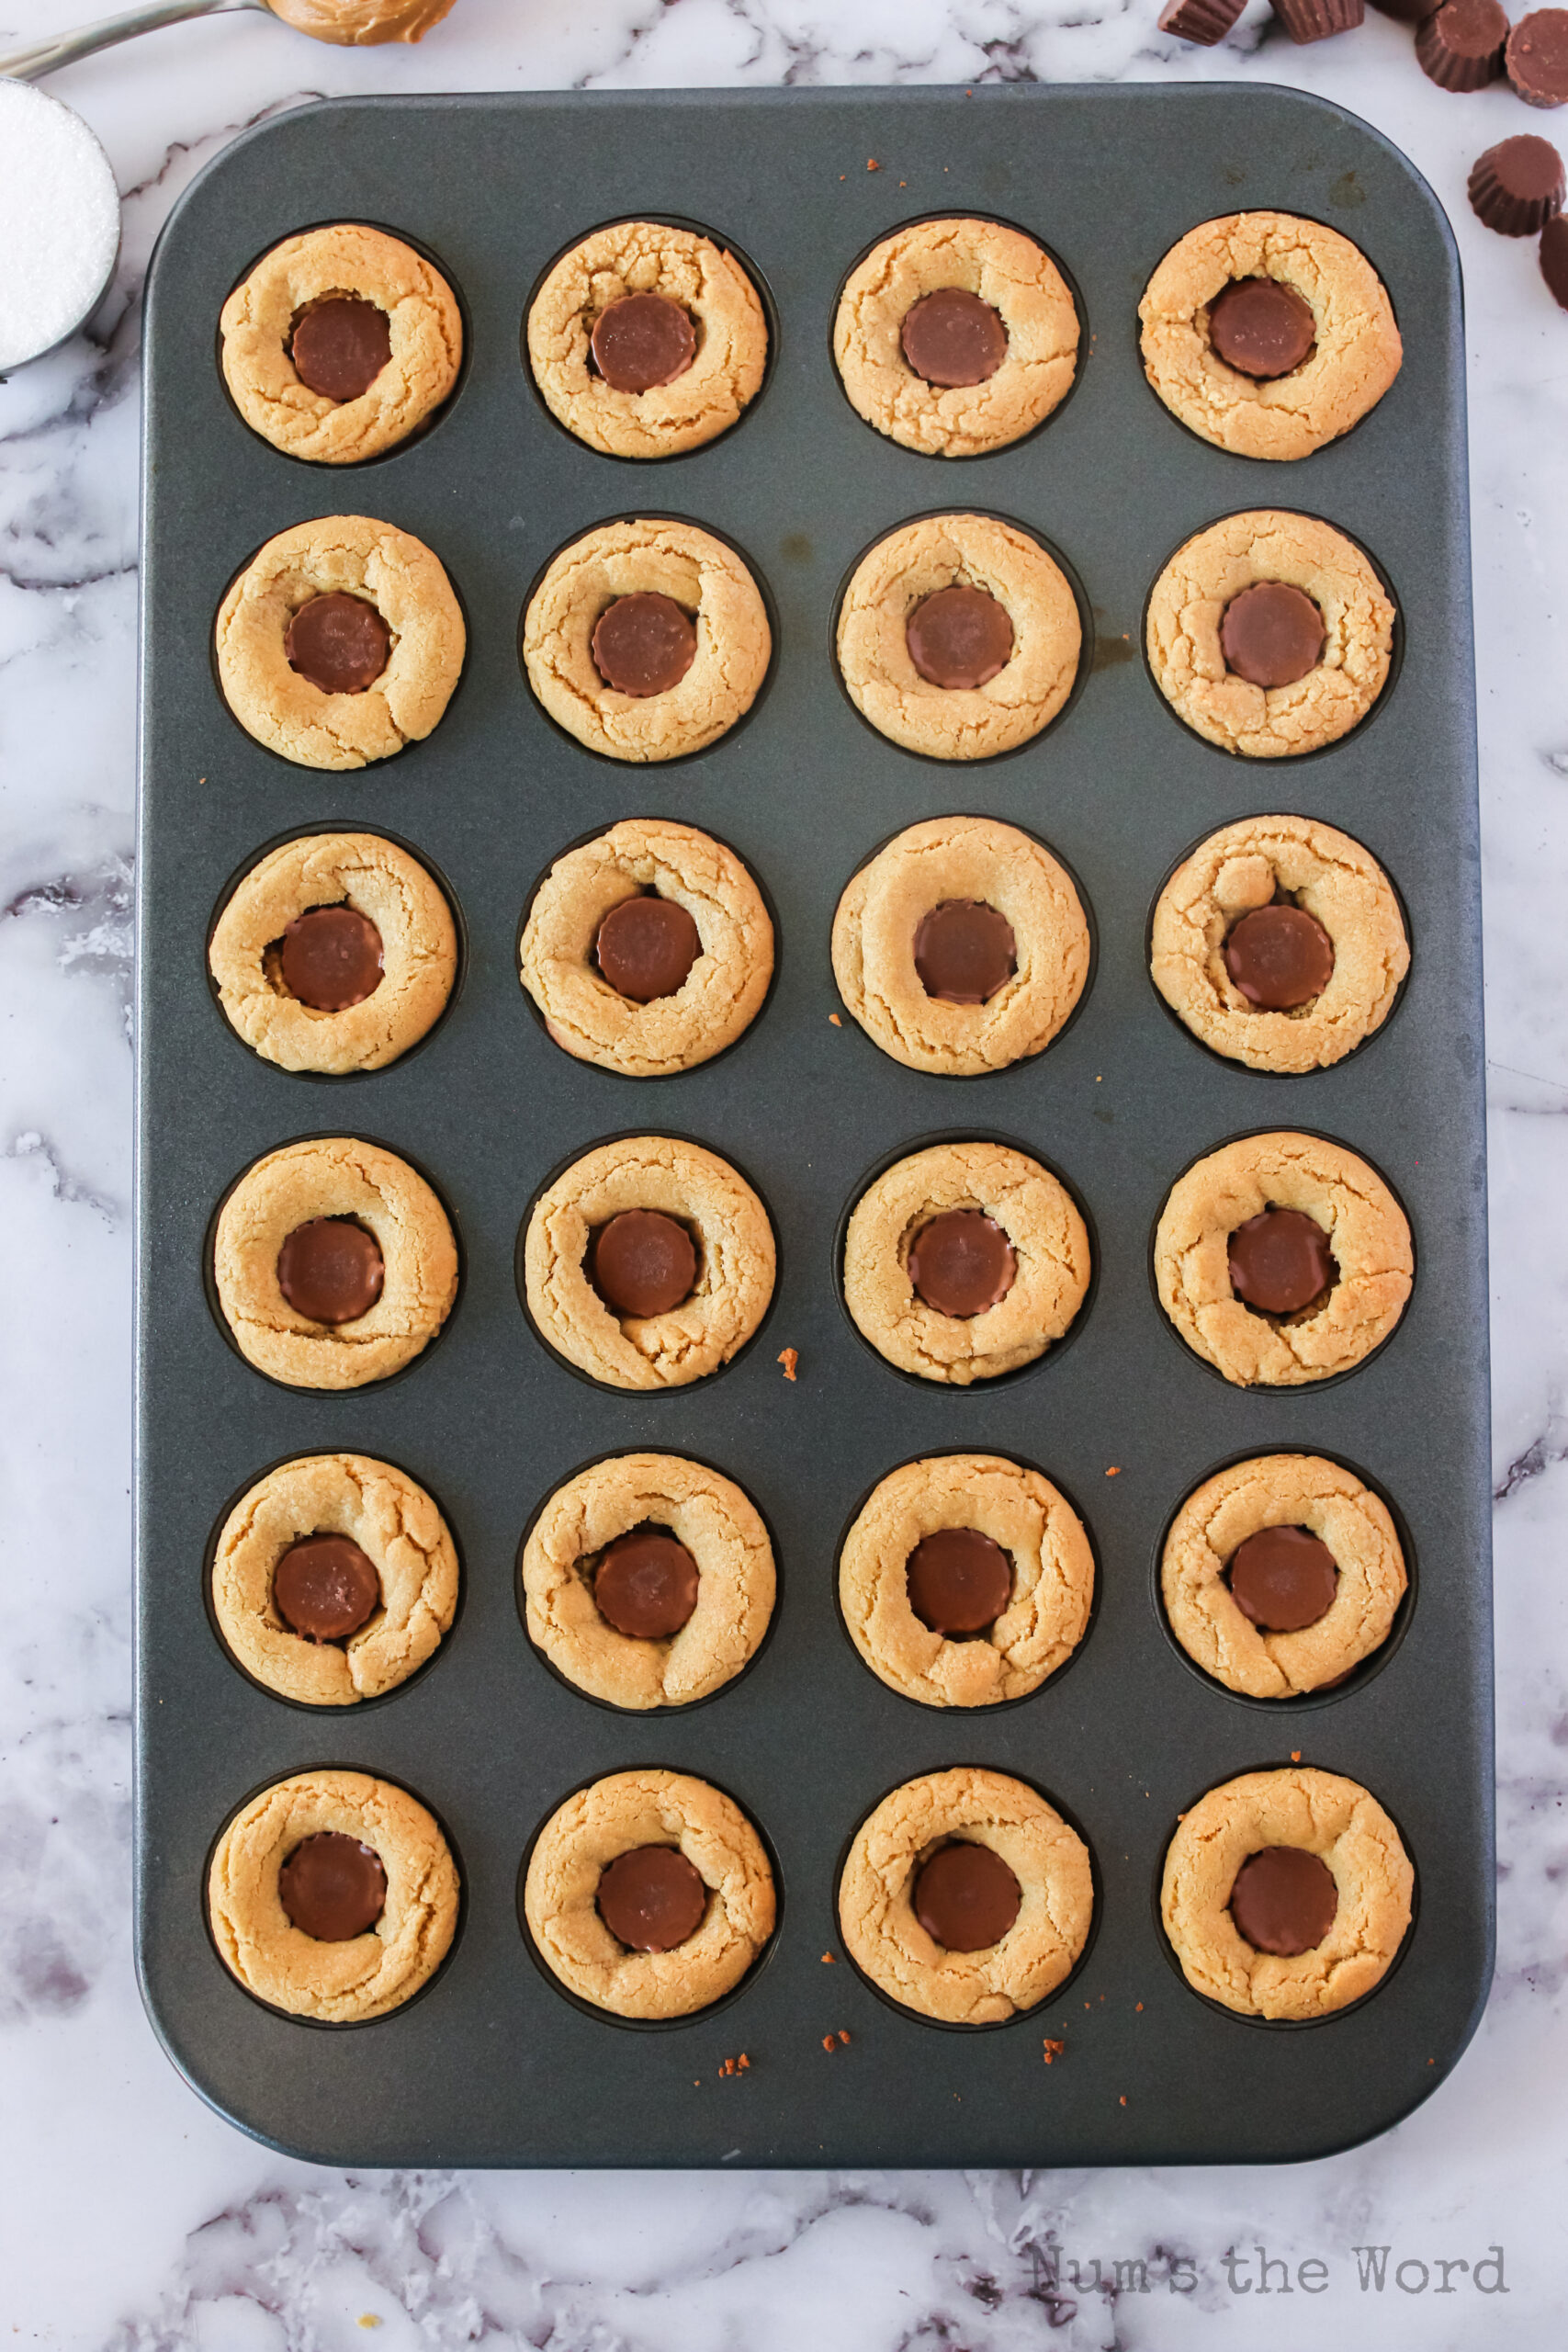 A mini peanut butter cup pressed into baked peanut butter cookies